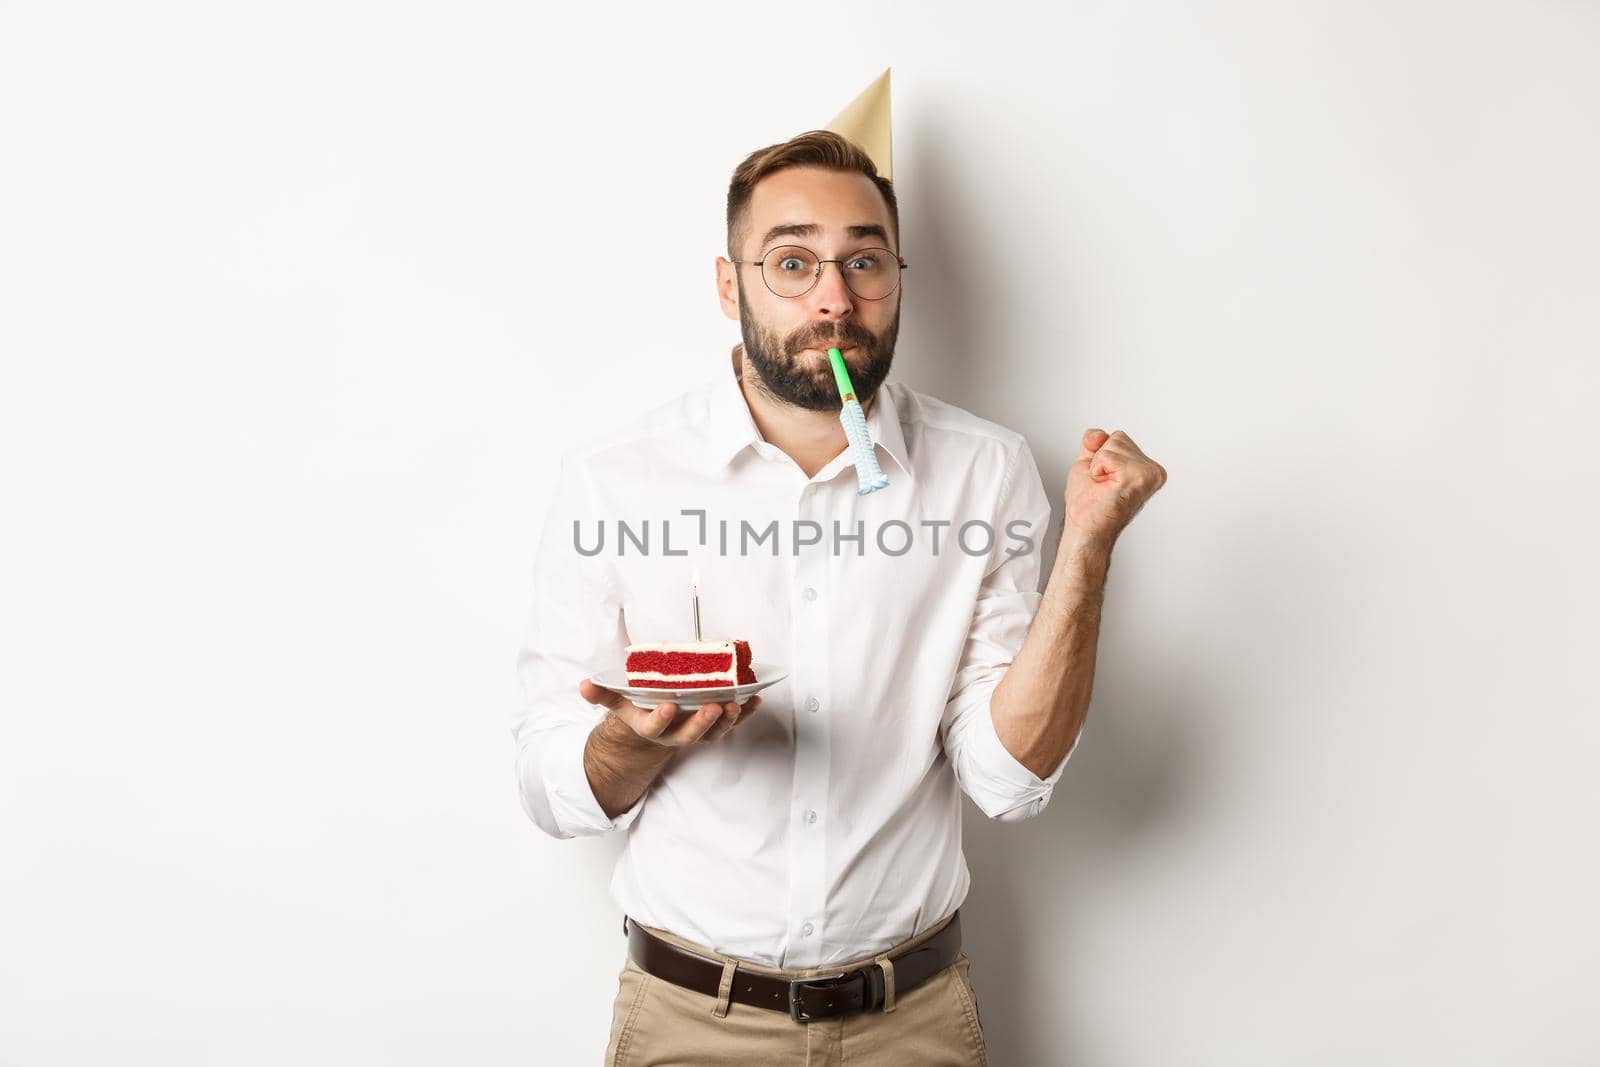 Holidays and celebration. Cheerful man enjoying birthday, blowing party whistle and holding bday cake, white background.